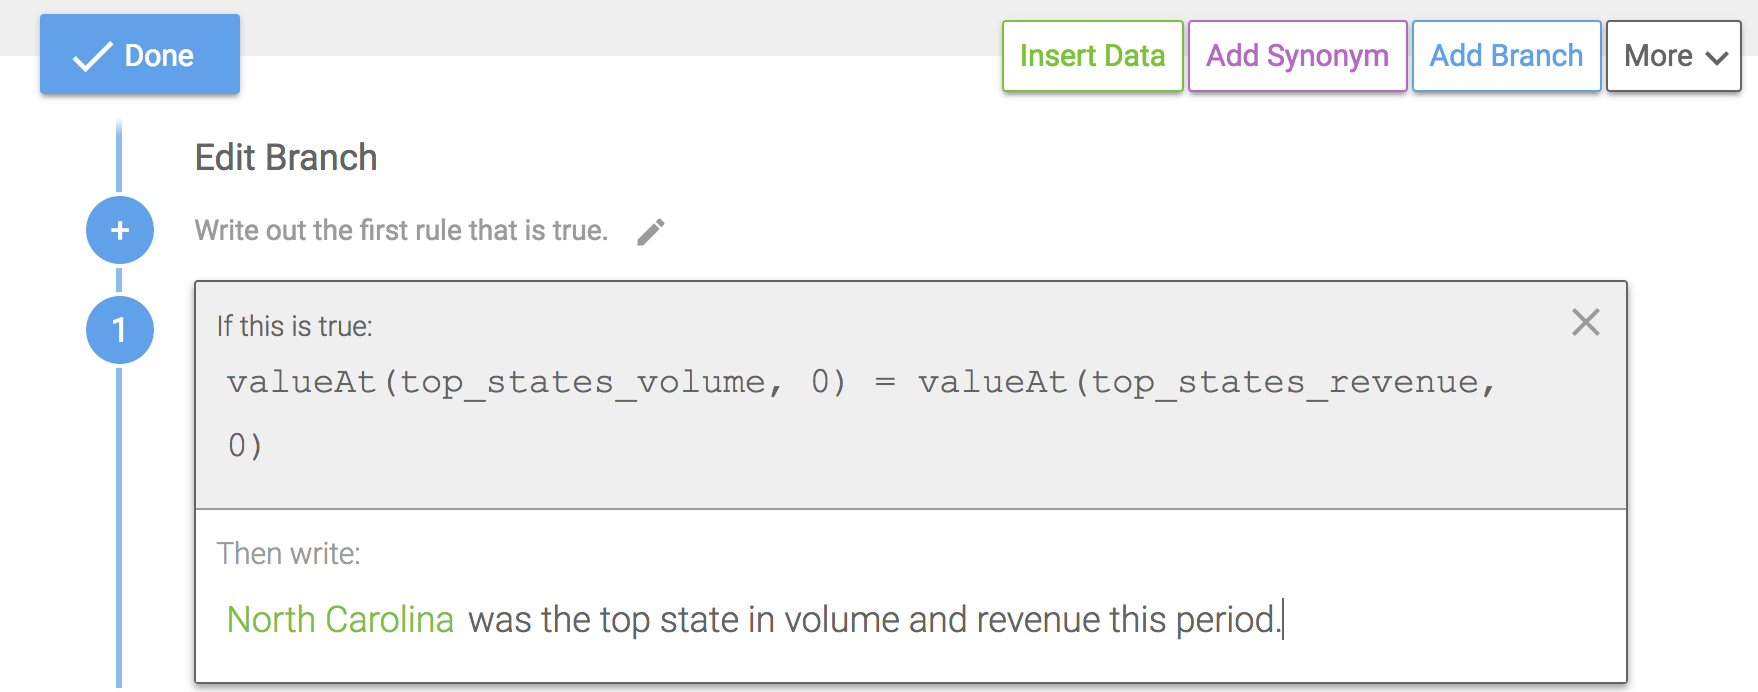 In this Branch, we're checking to see if the first object is the same for two Lists, the top_states_volume and top_states_revenue.